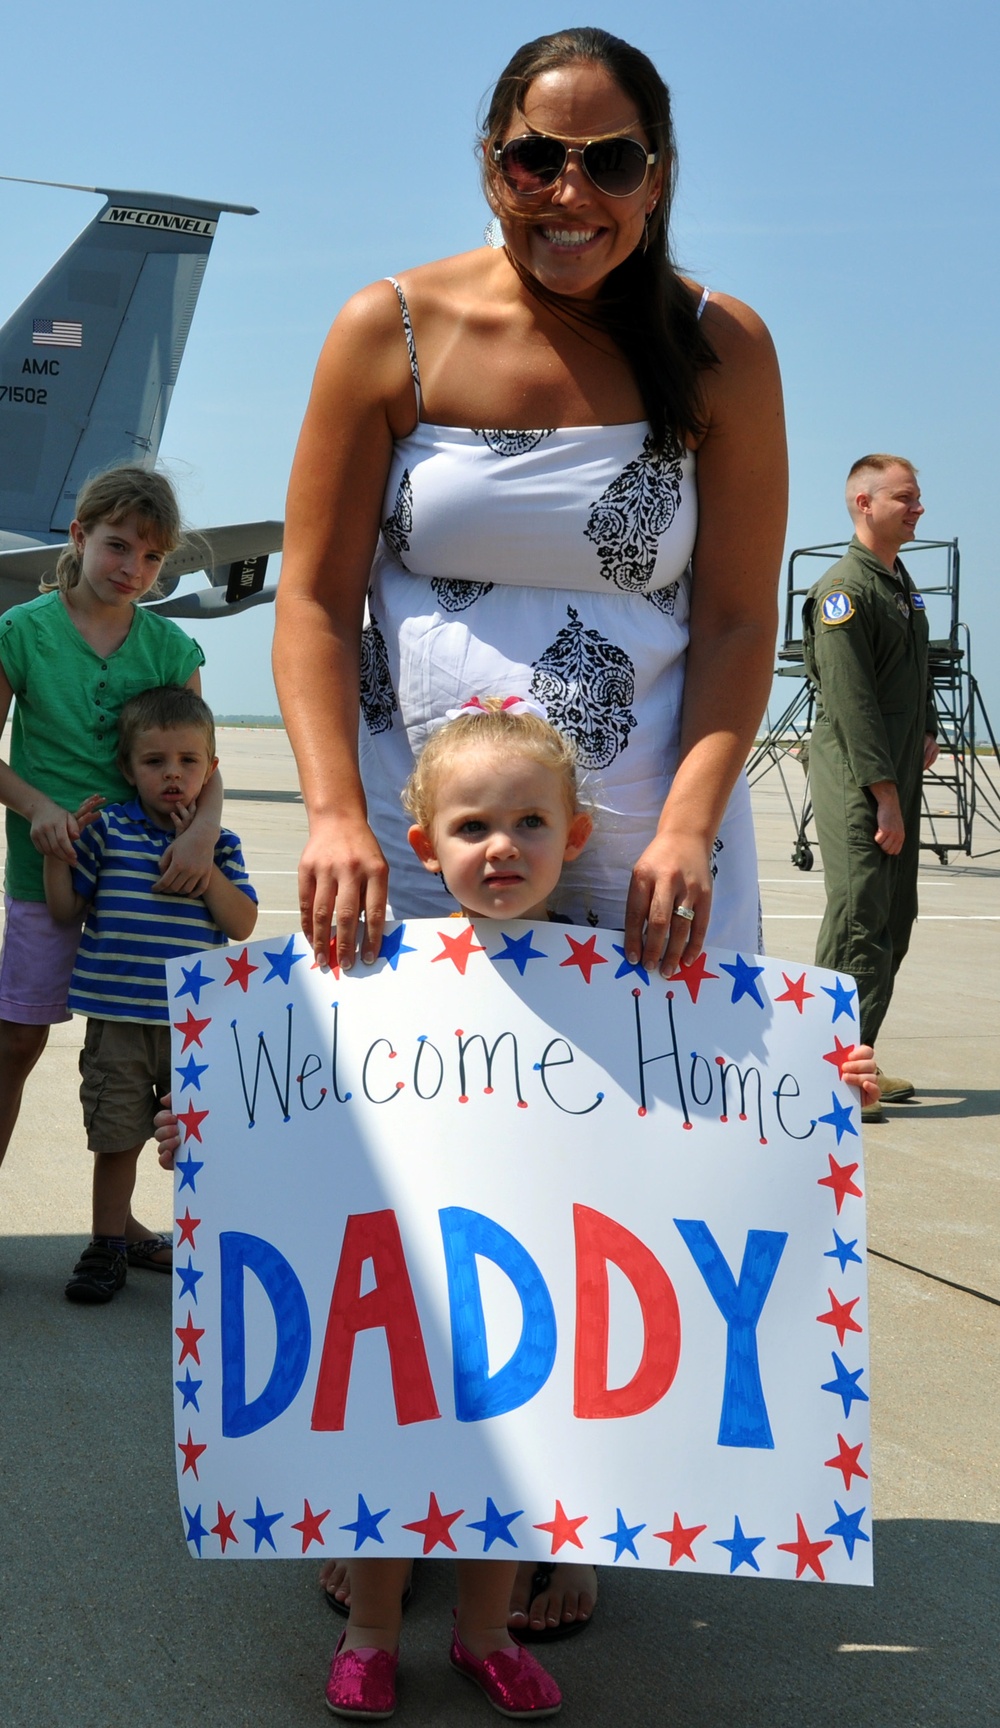 McConnell Reservists return from deployment